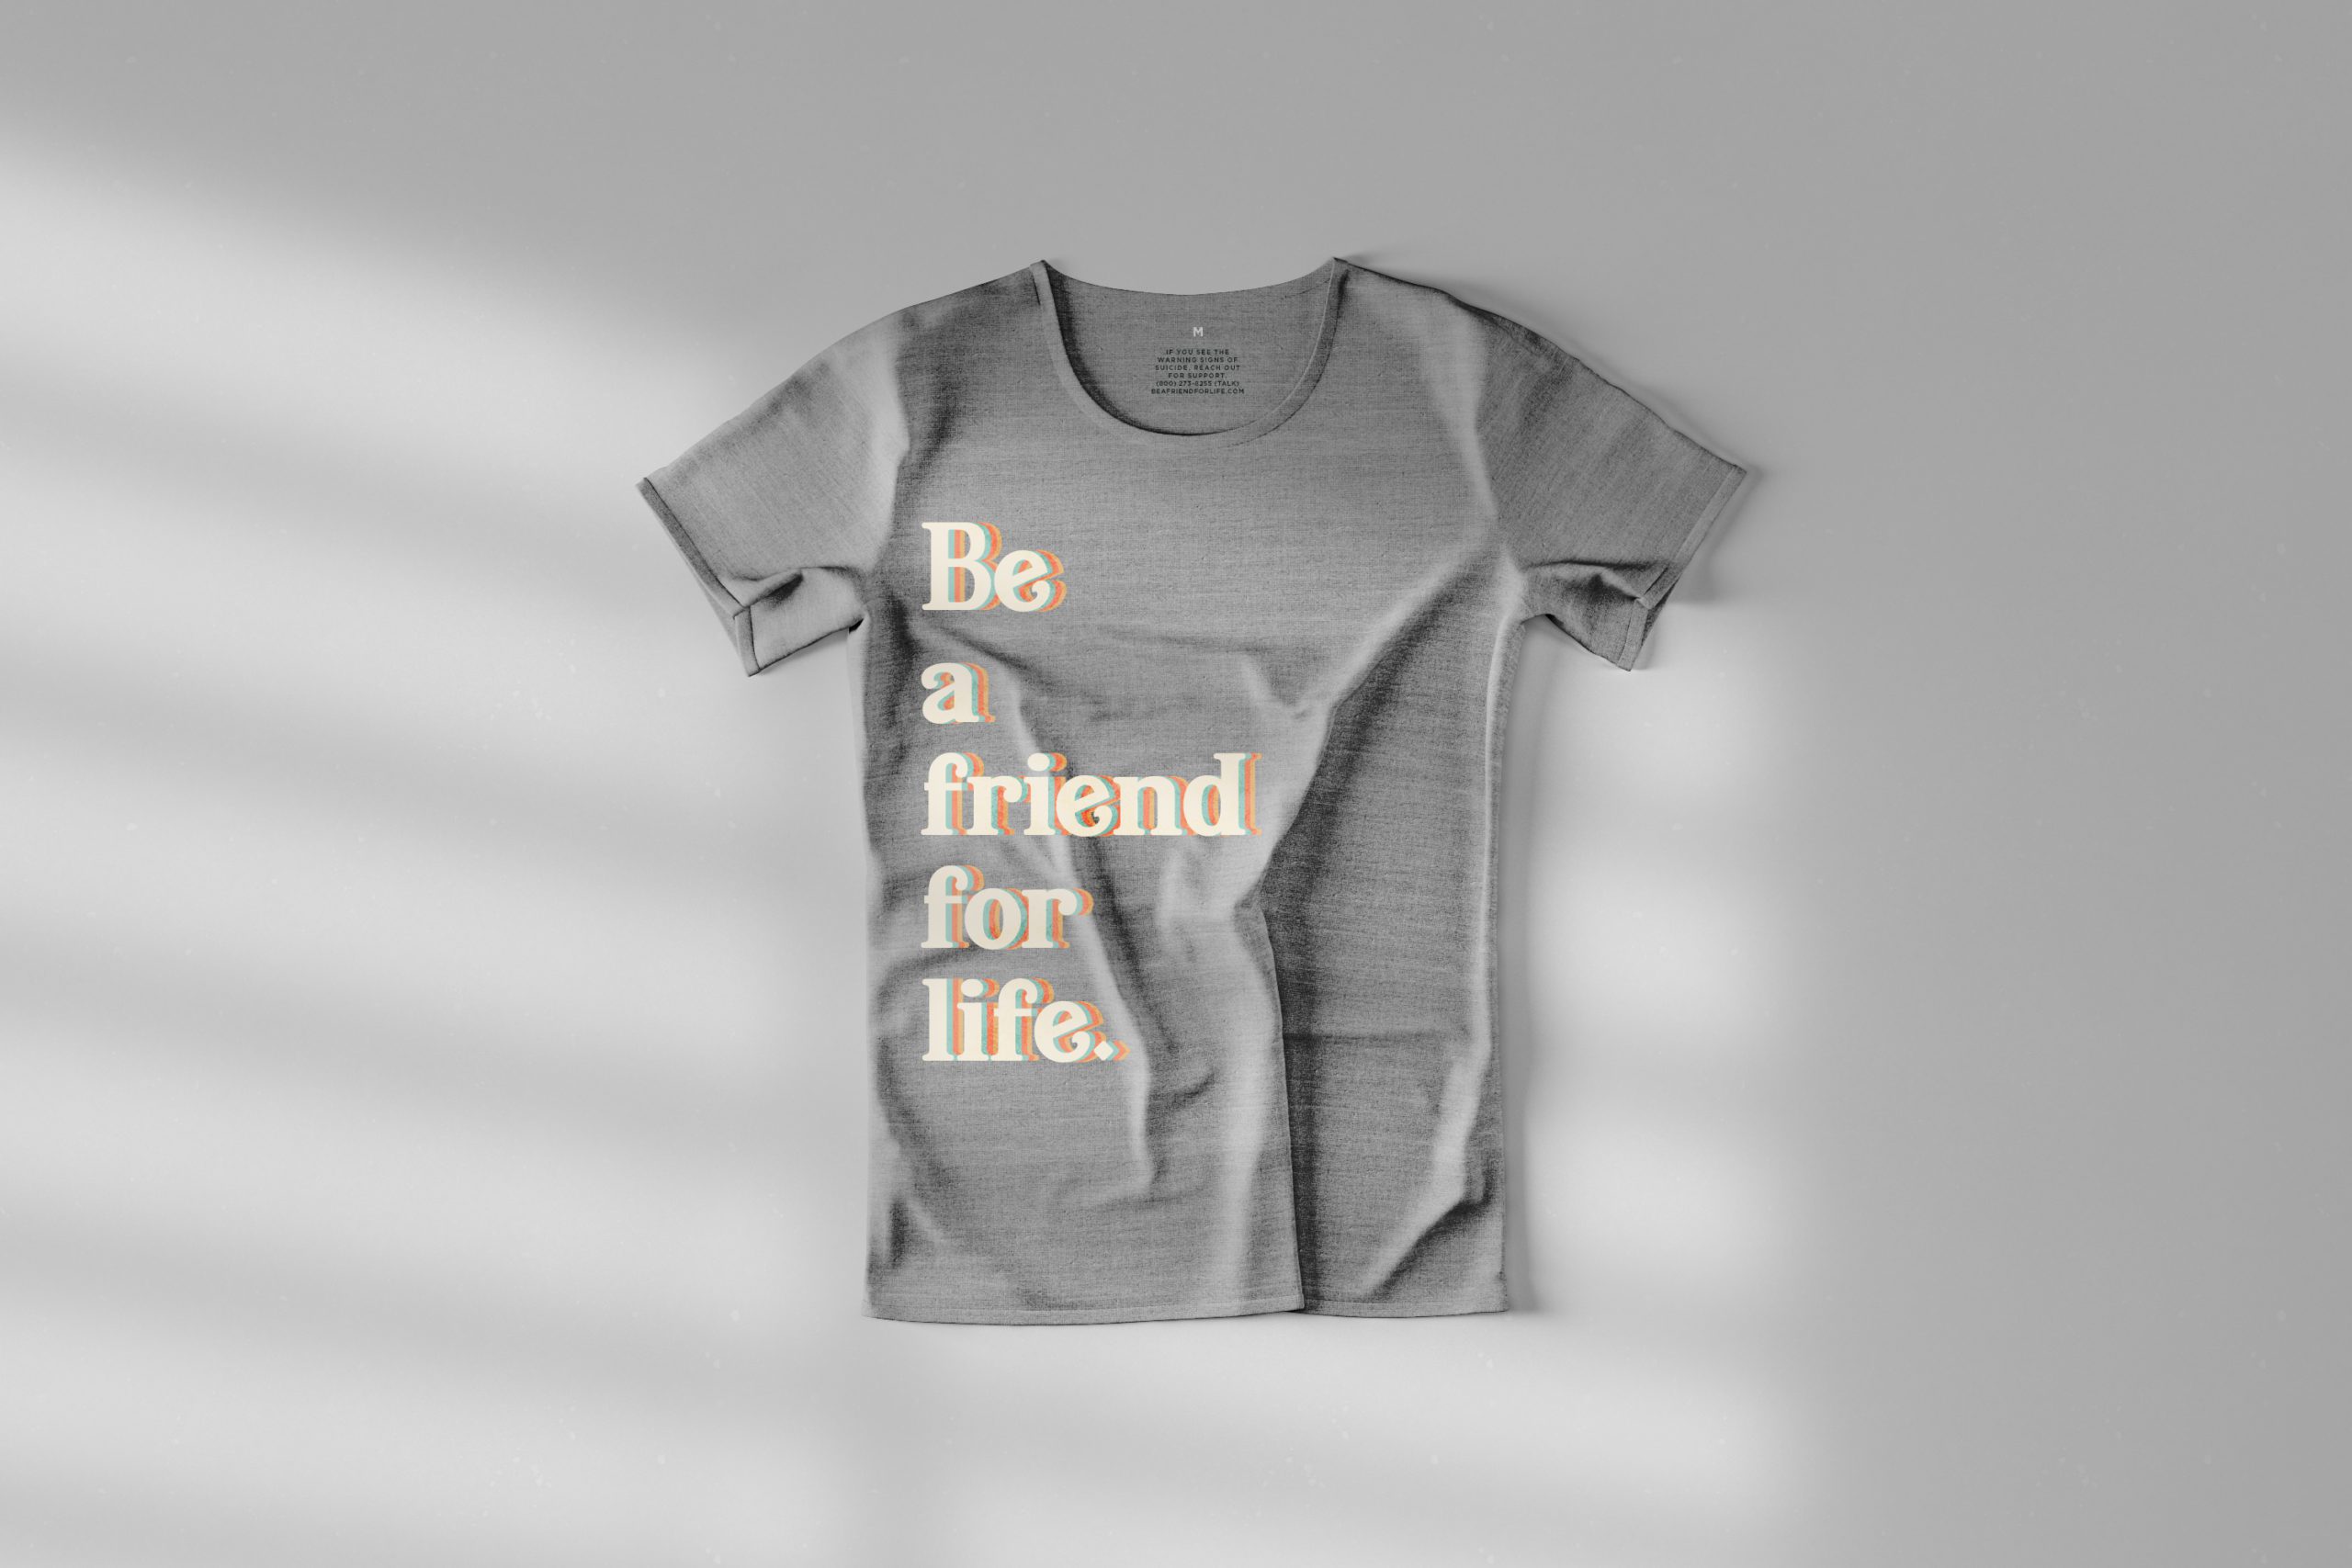 Orange County Health Care Agency youth suicide prevention campaign tshirt & promotional materials, creative agency